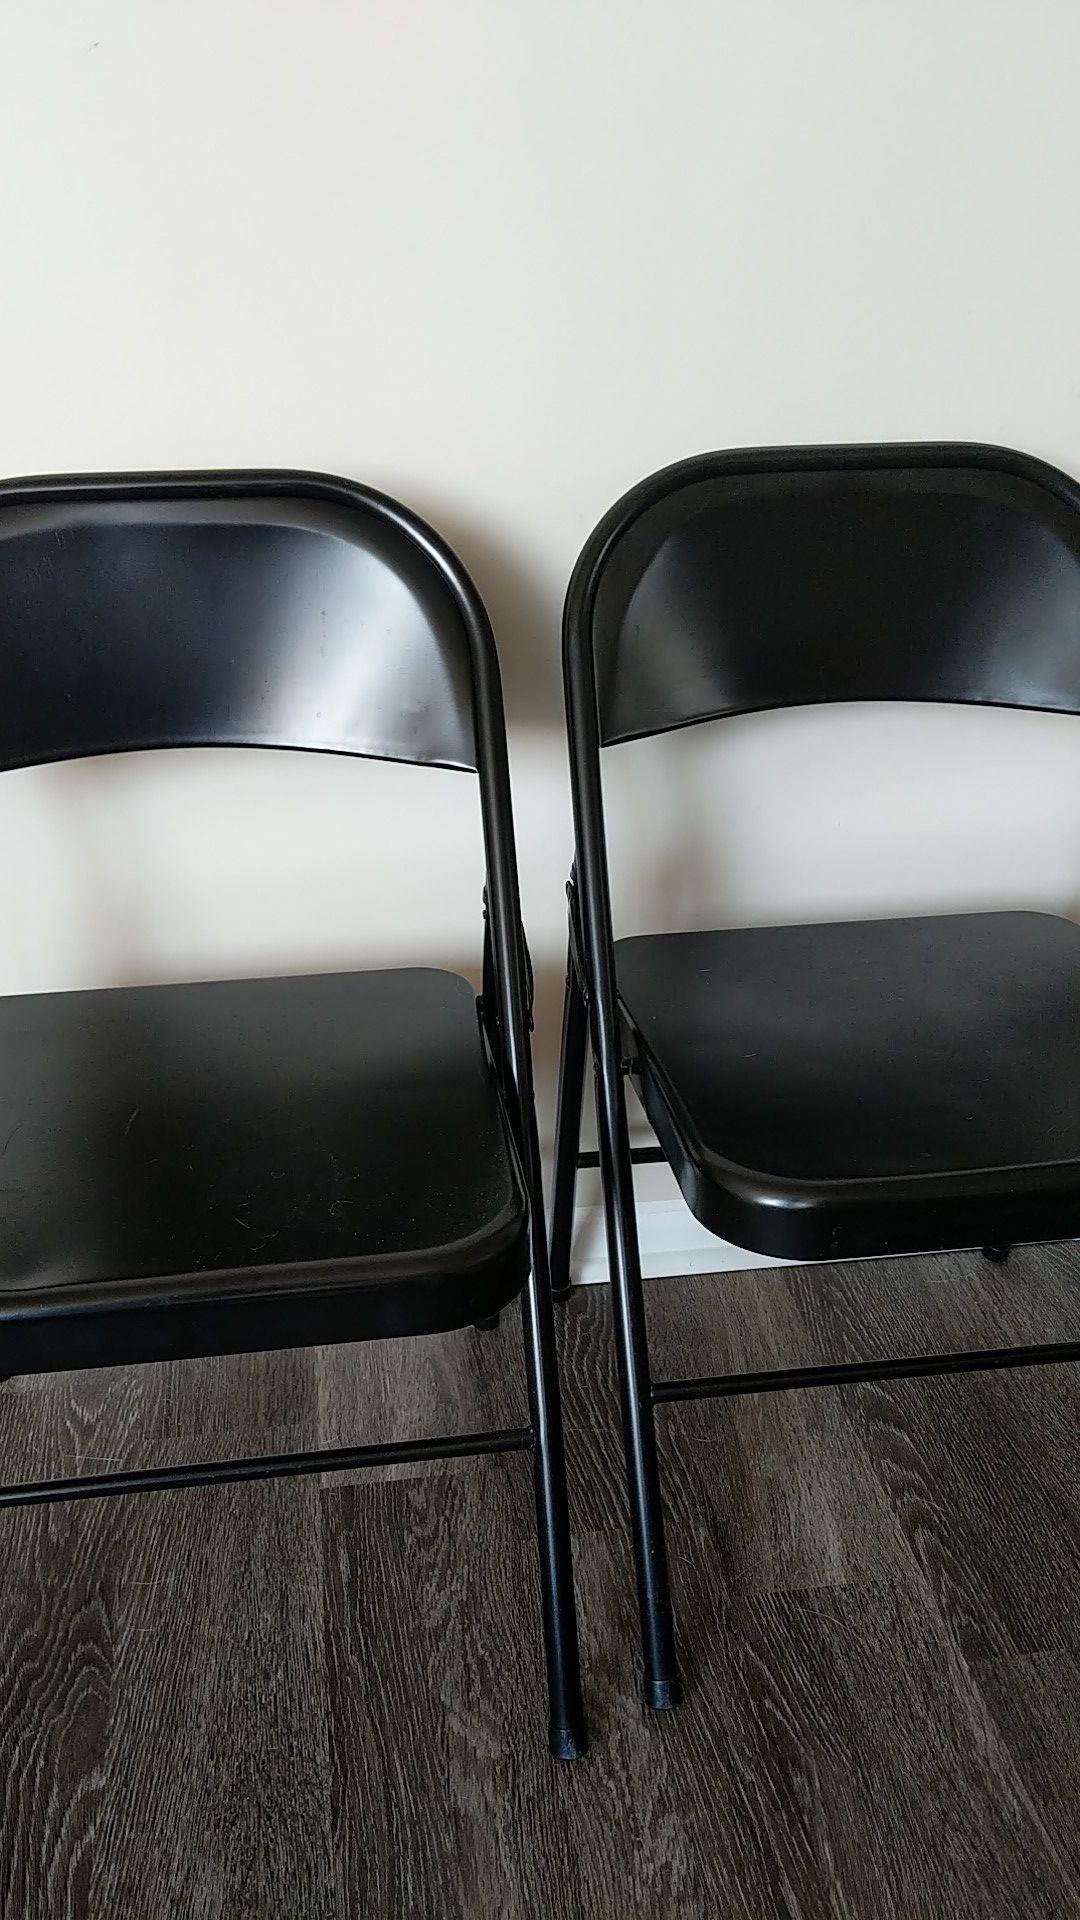 Two metal folding chairs